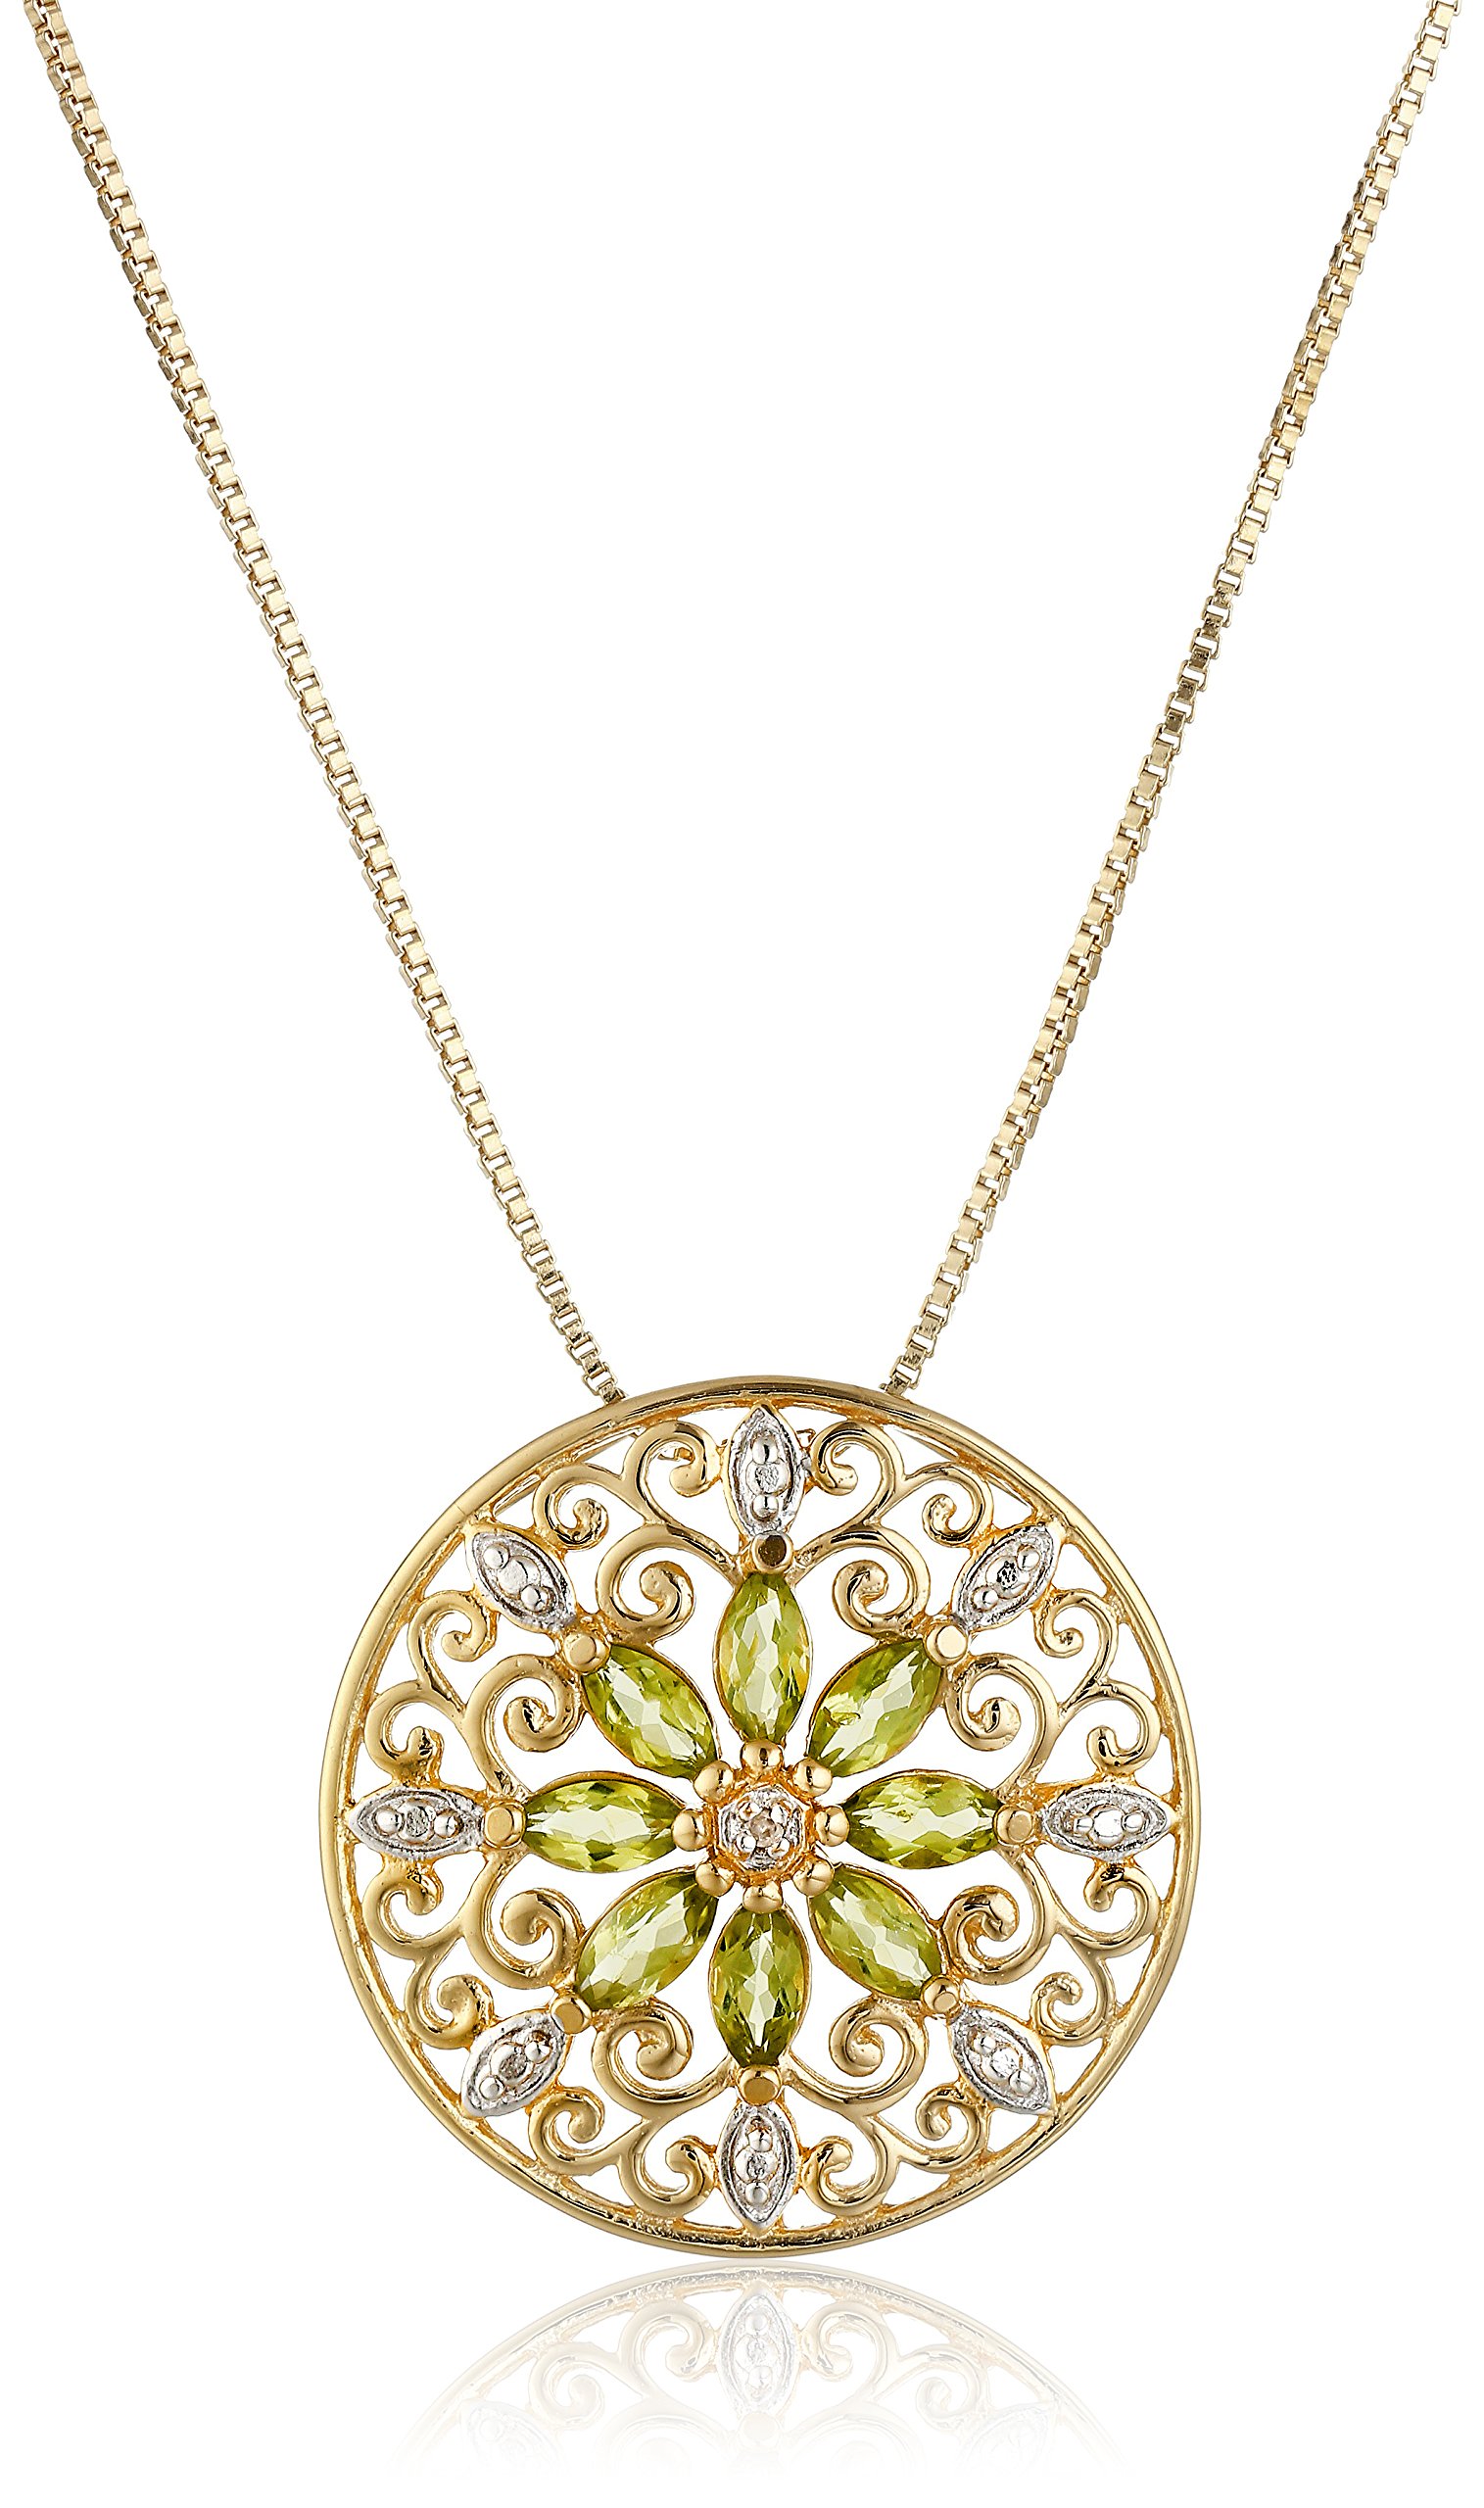 Amazon Collection 18k Yellow Gold Plated Sterling Silver Gemstone and Diamond Accent Filigree Mandala Pendant Necklace, 18